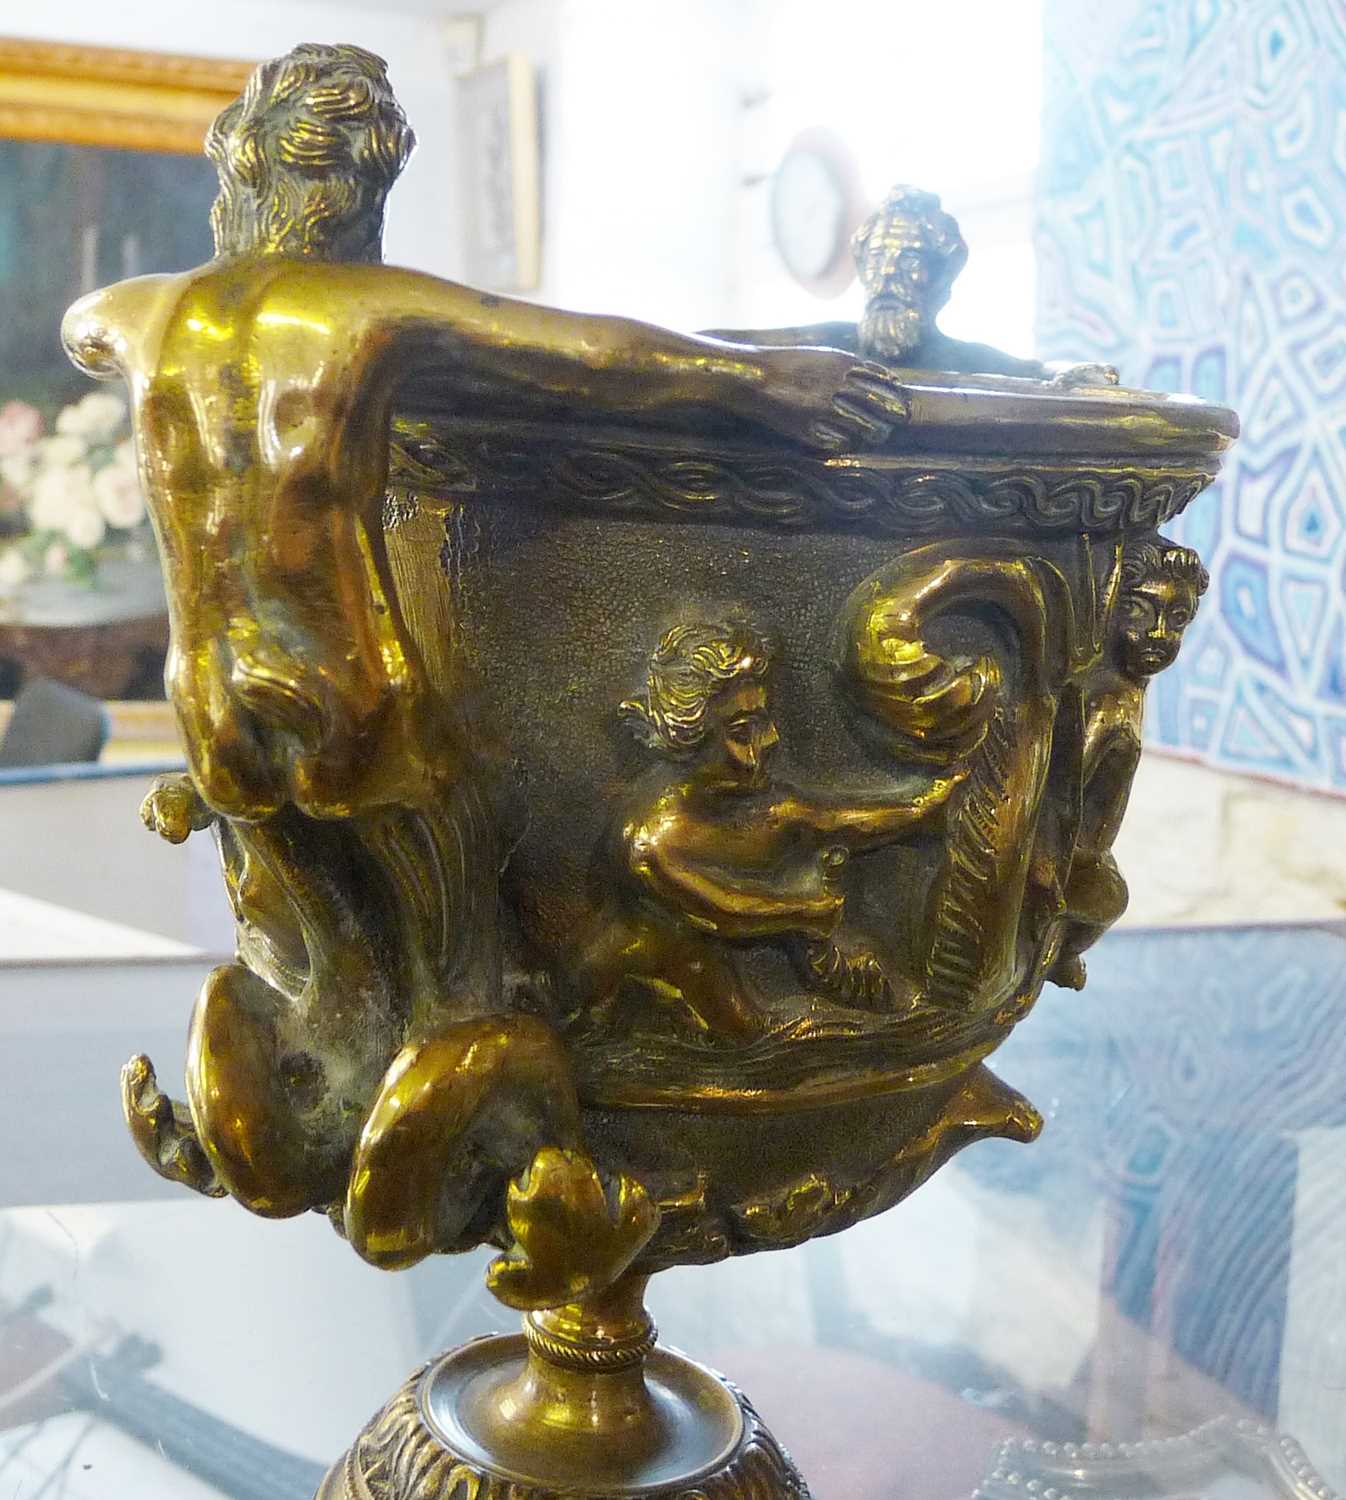 19th century Italian burnished bronze chalice with two Mermen handles and classical marine relief - Image 3 of 3